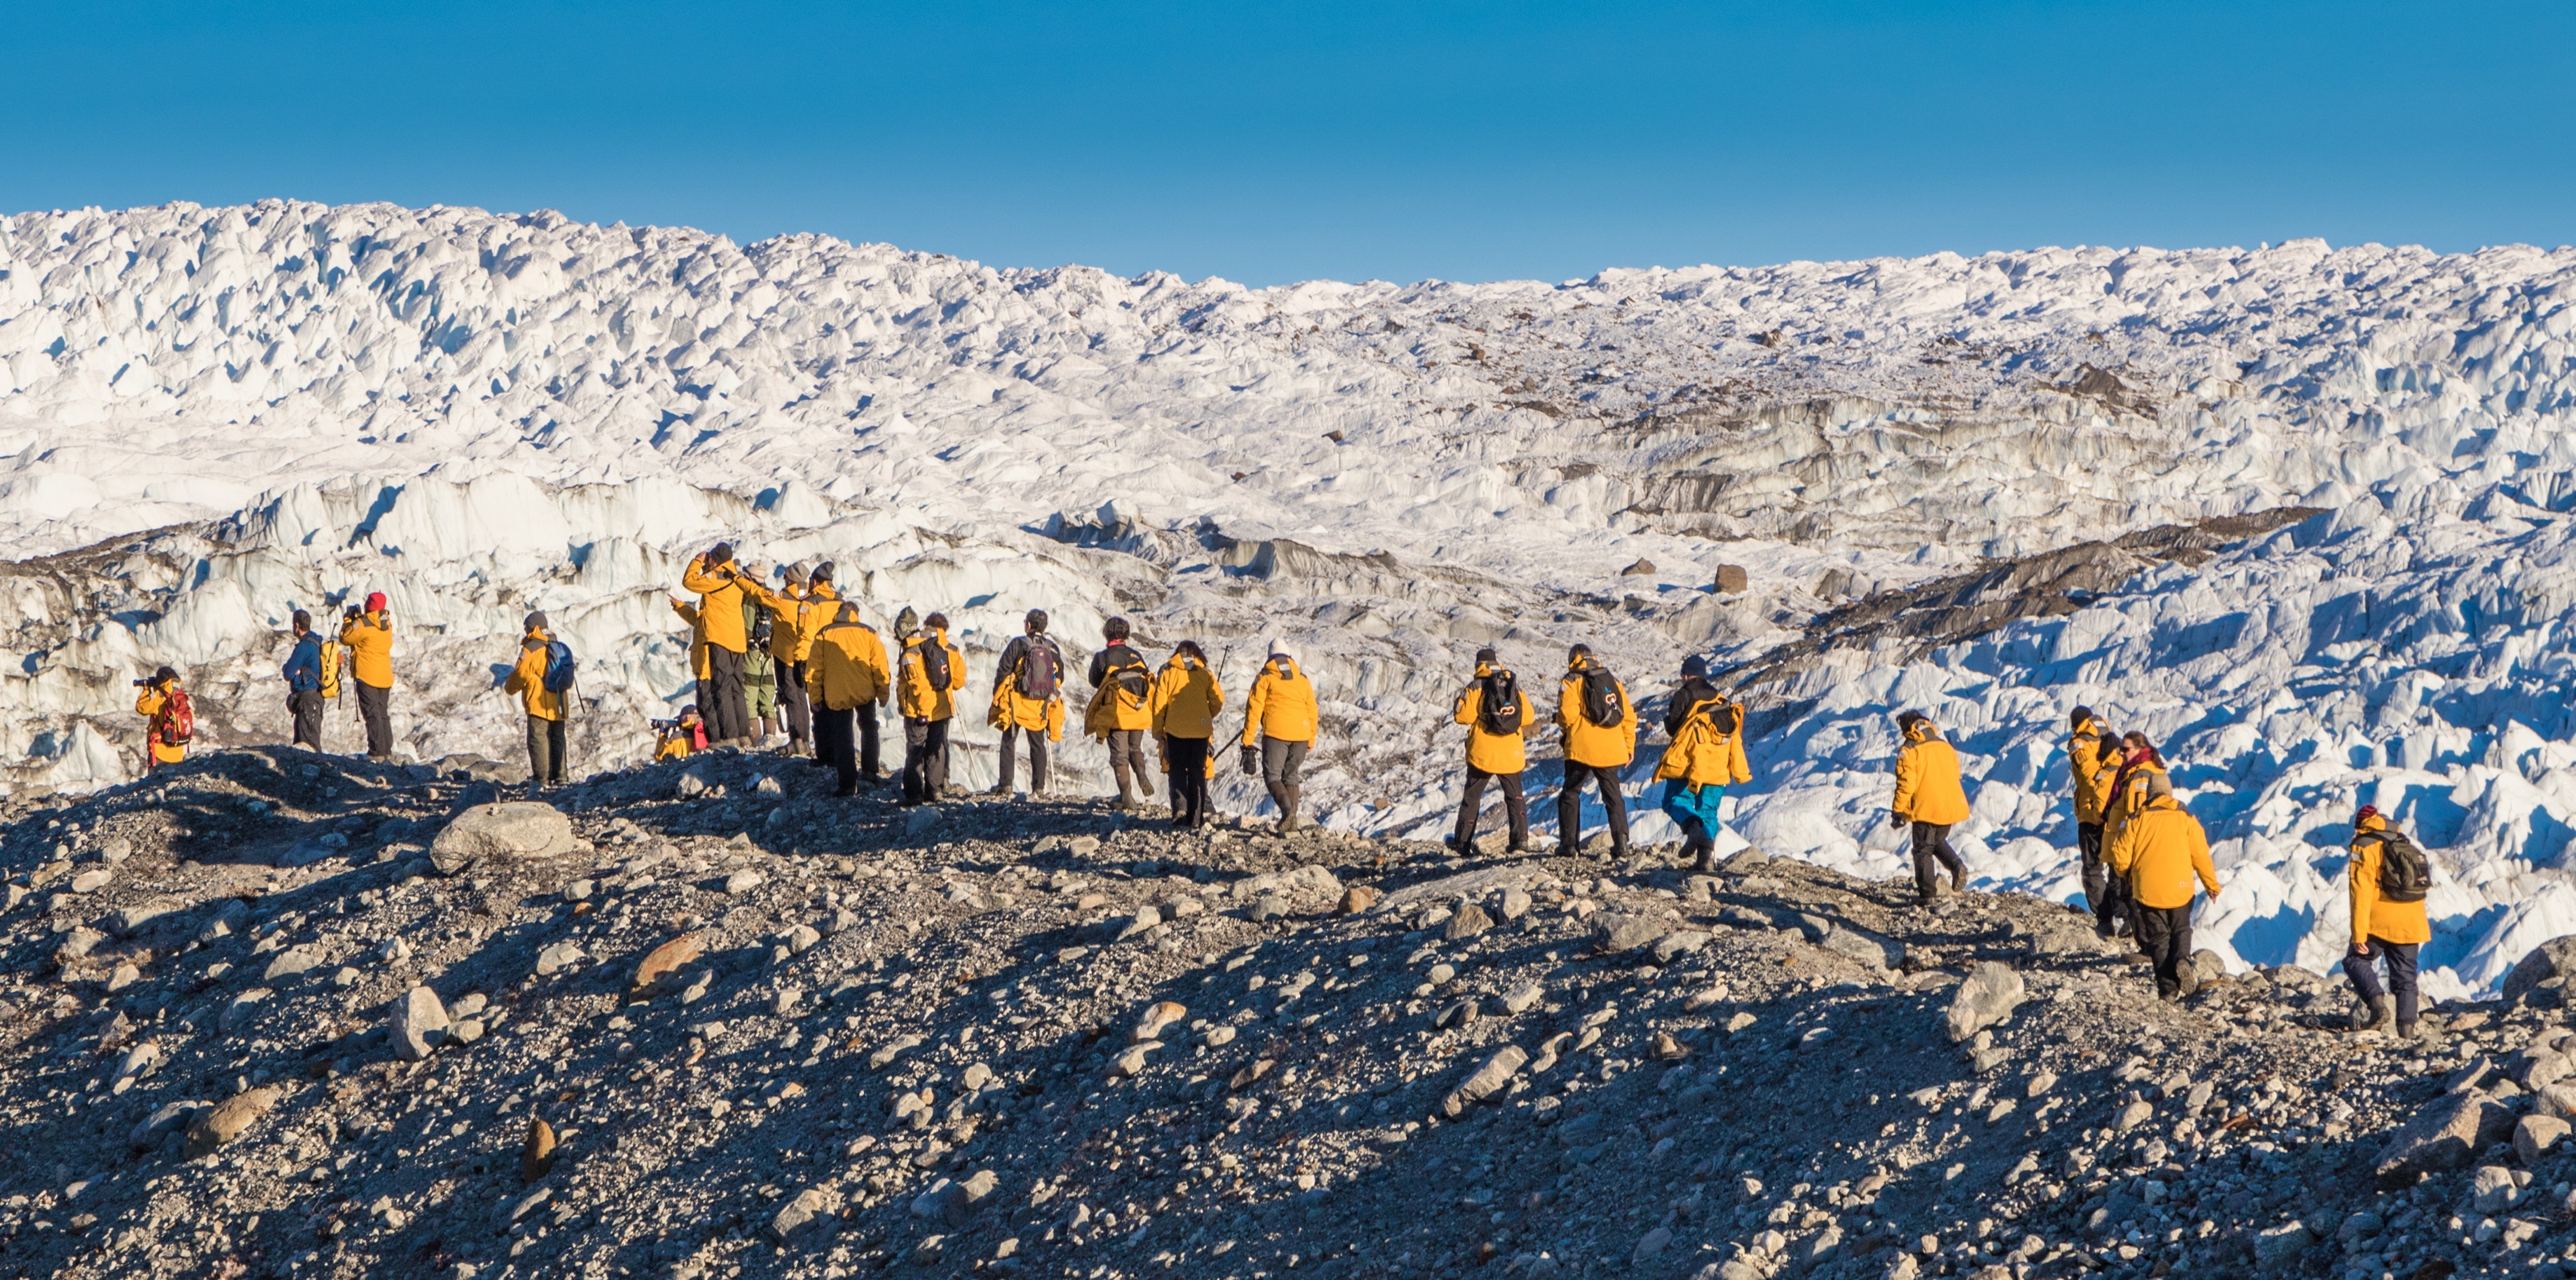 Quark passengers take a guided hike over rugged Greenland terrain on an expedition shore landing.